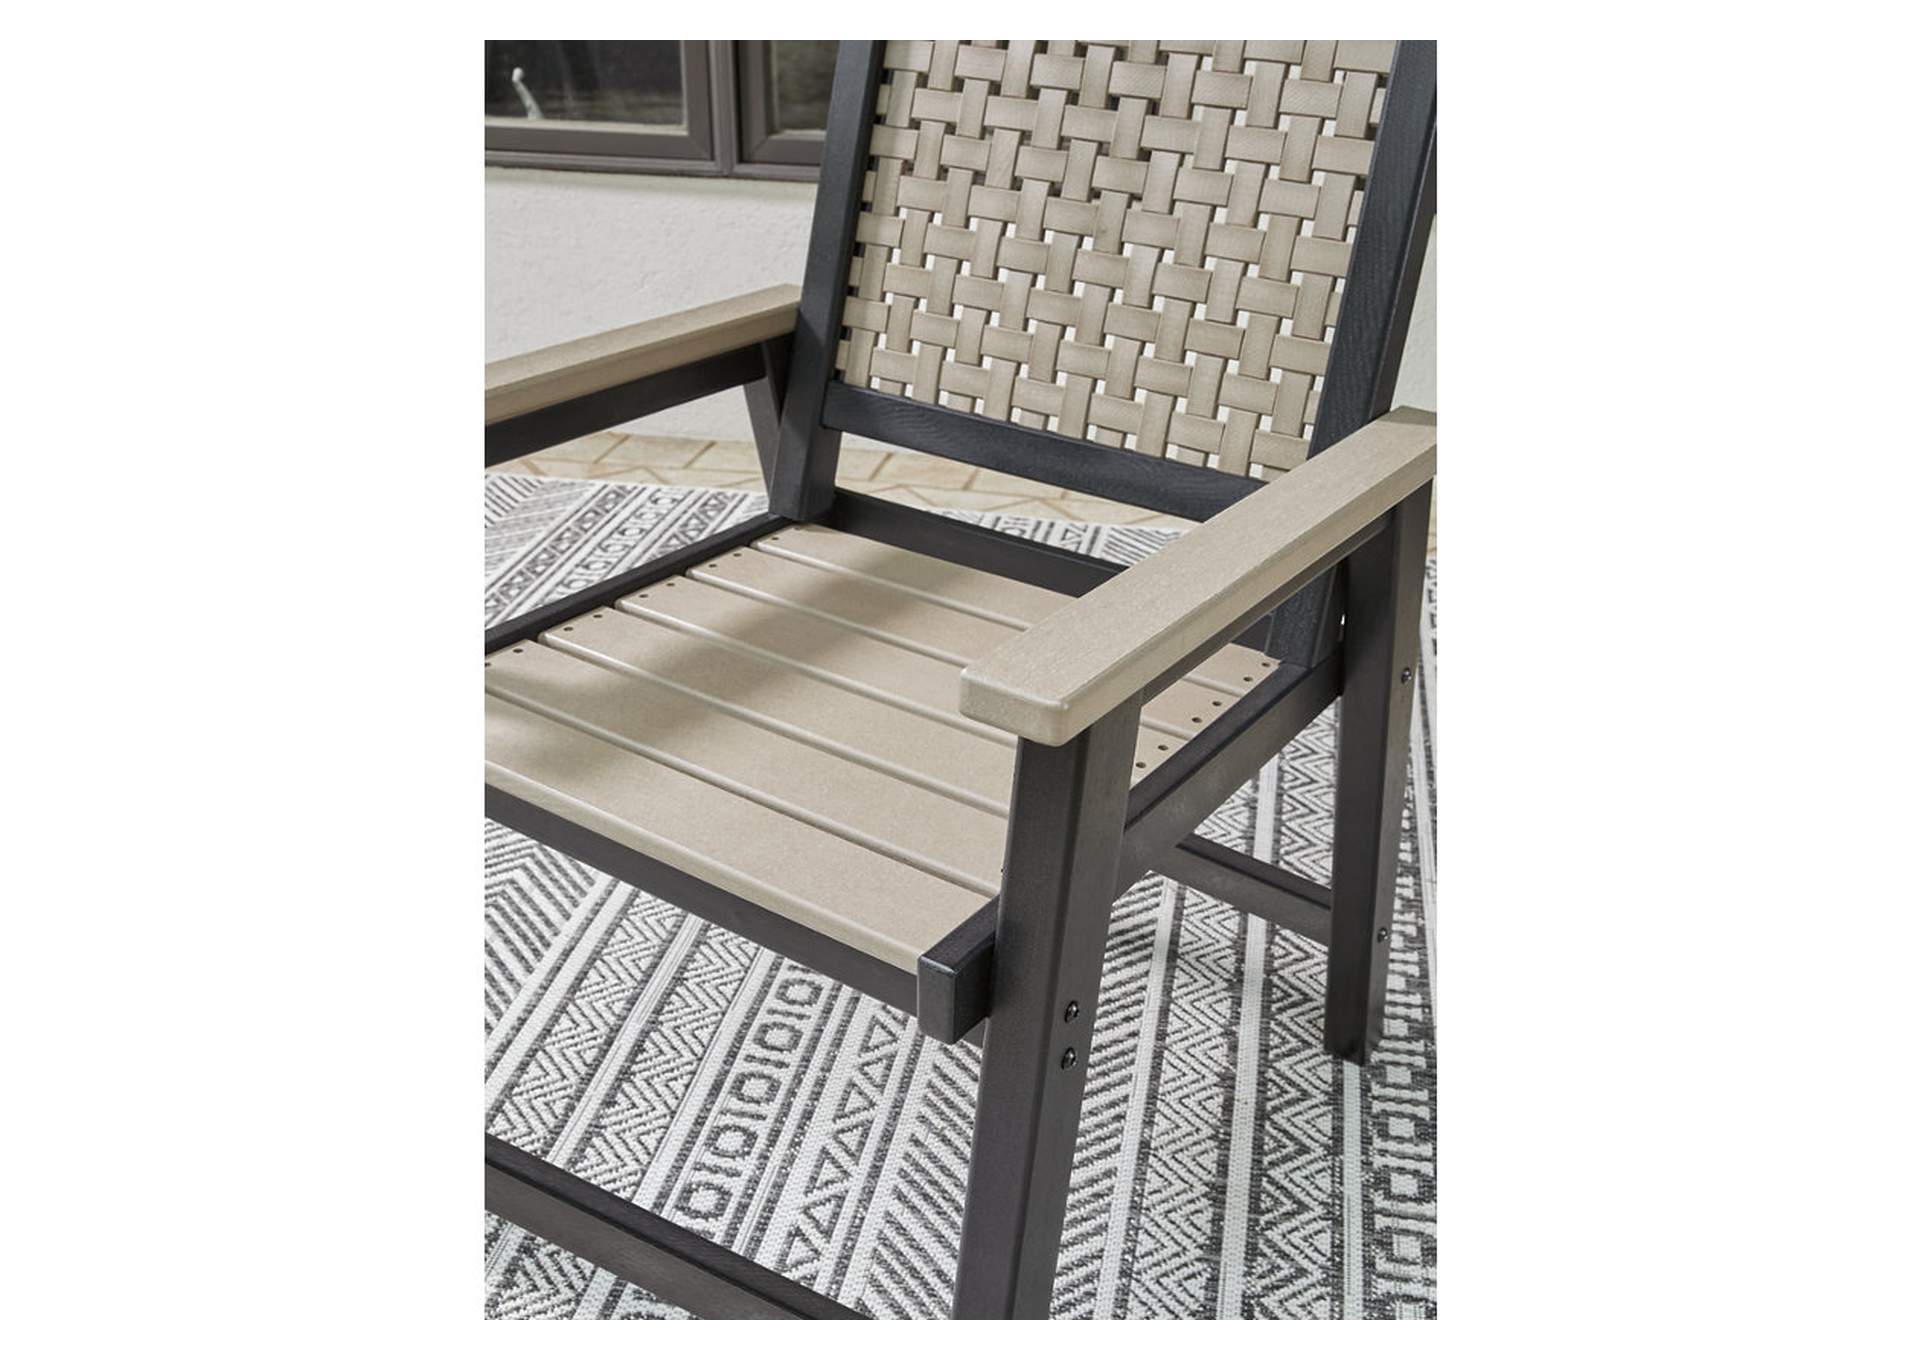 Mount Valley Arm Chair (set Of 2),Outdoor By Ashley